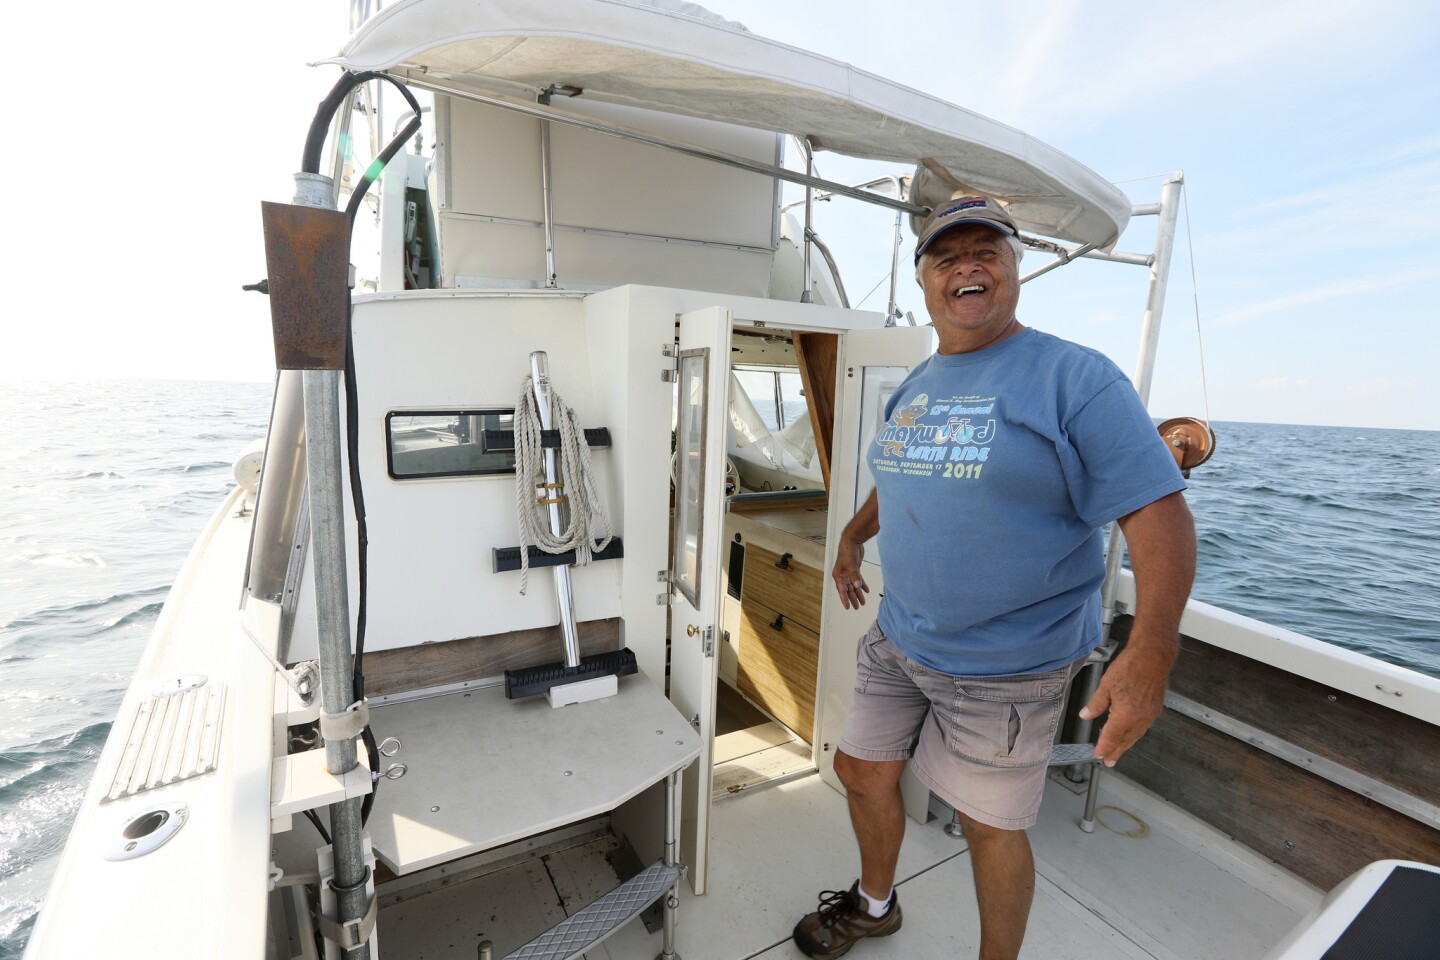 Shipwreck enthusiast Steve Radovan, of Sheboygan, Wis., aboard his boat Wednesday, Aug. 9, 2017, in Lake Michigan. An avid underwater explorer since the mid-1970's and discoverer of sunken ships, Radovan is a strong advocate for a proposed national marine sanctuary for Lake Michigan.